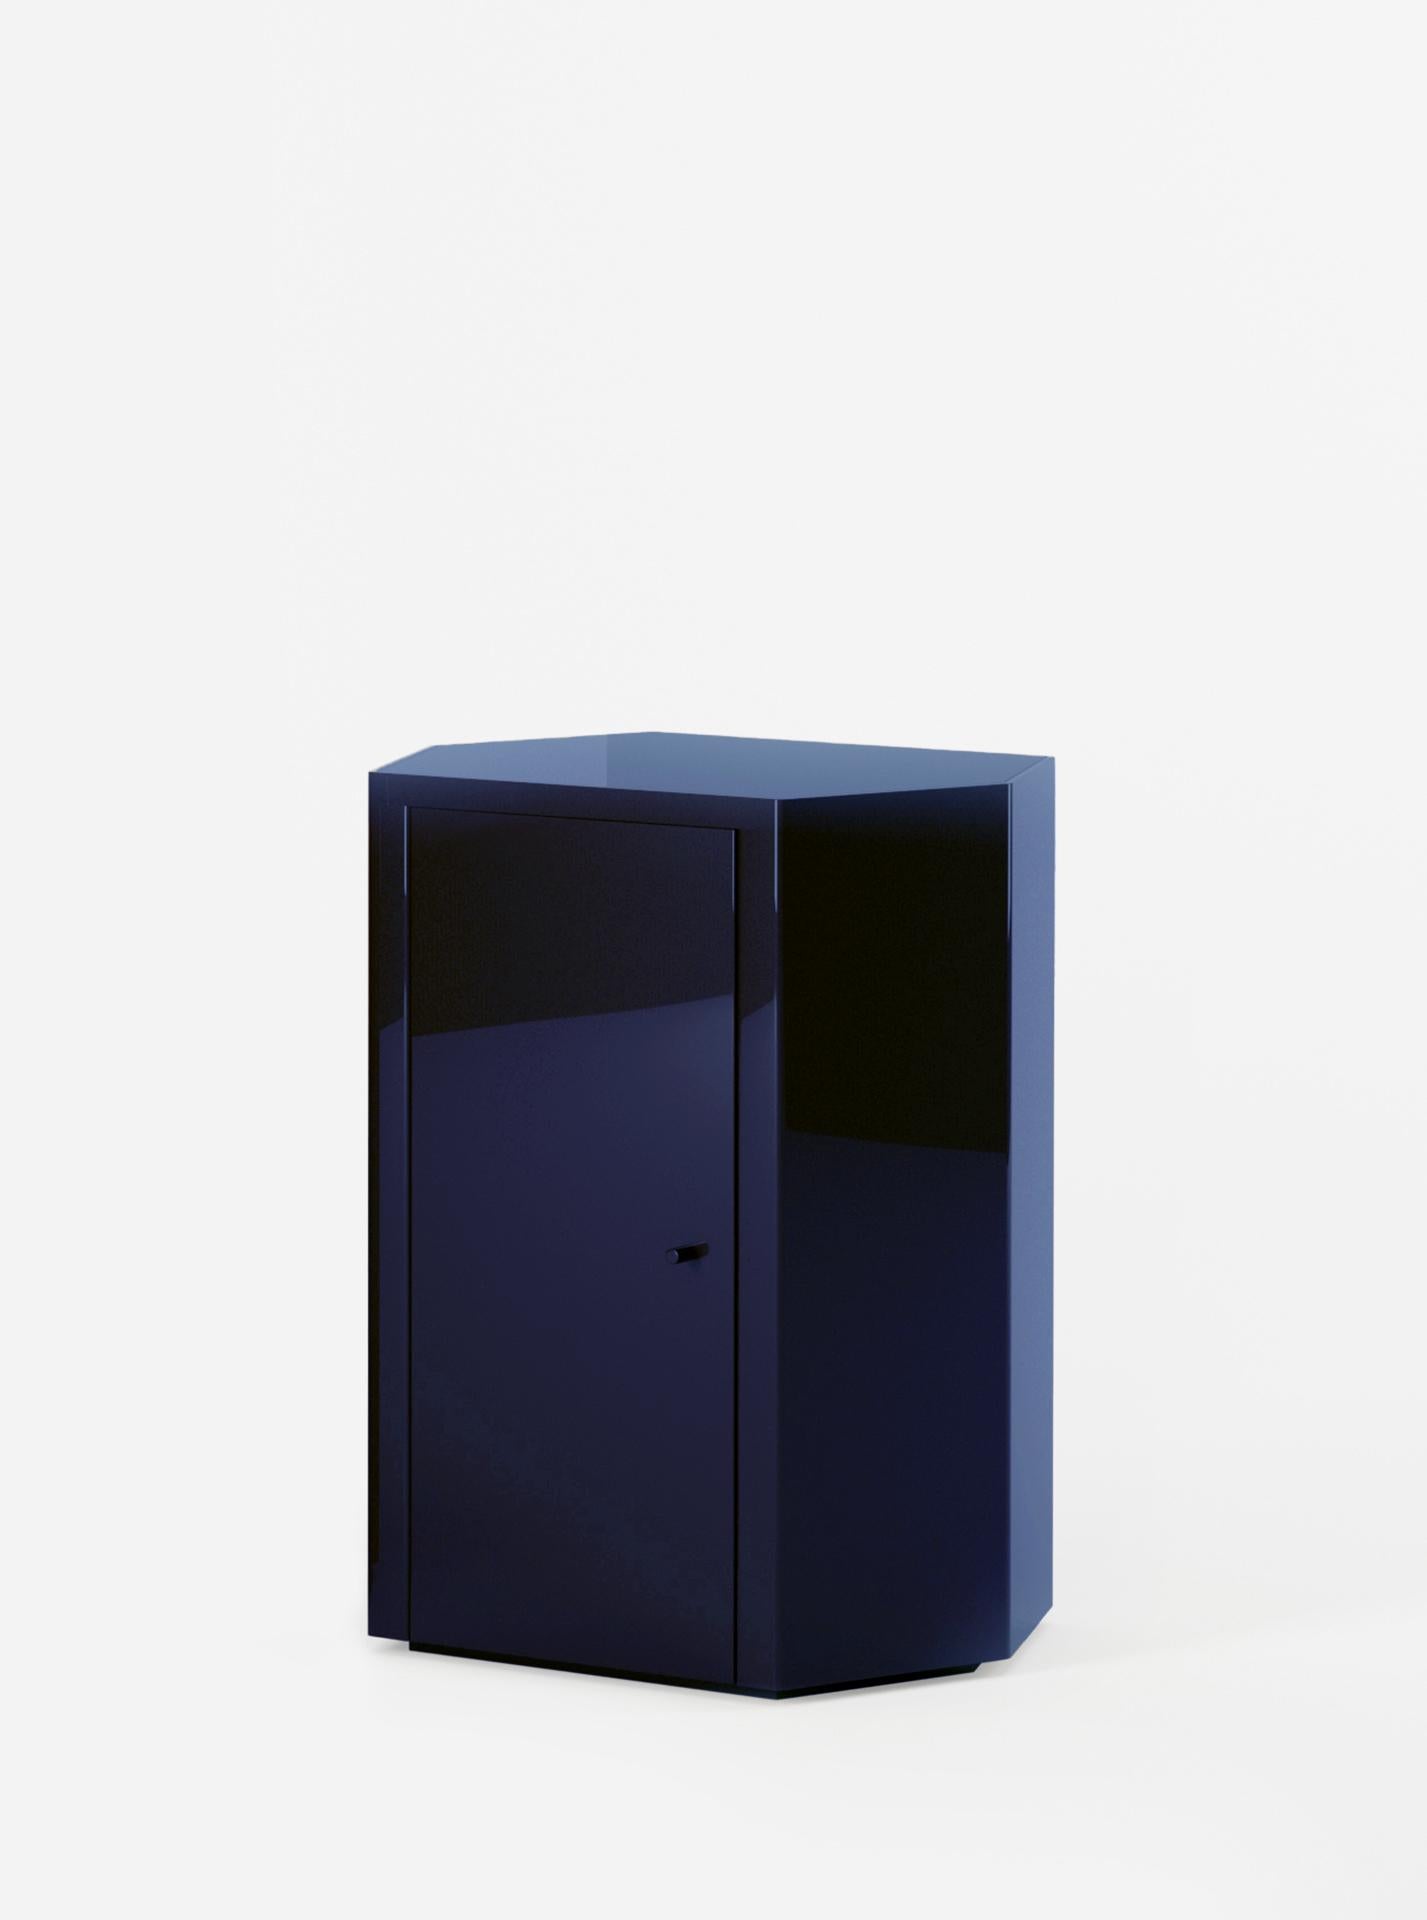 South African Pair of Park Night Stands in Midnight Navy Lacquer by Yaniv Chen for Lemon For Sale